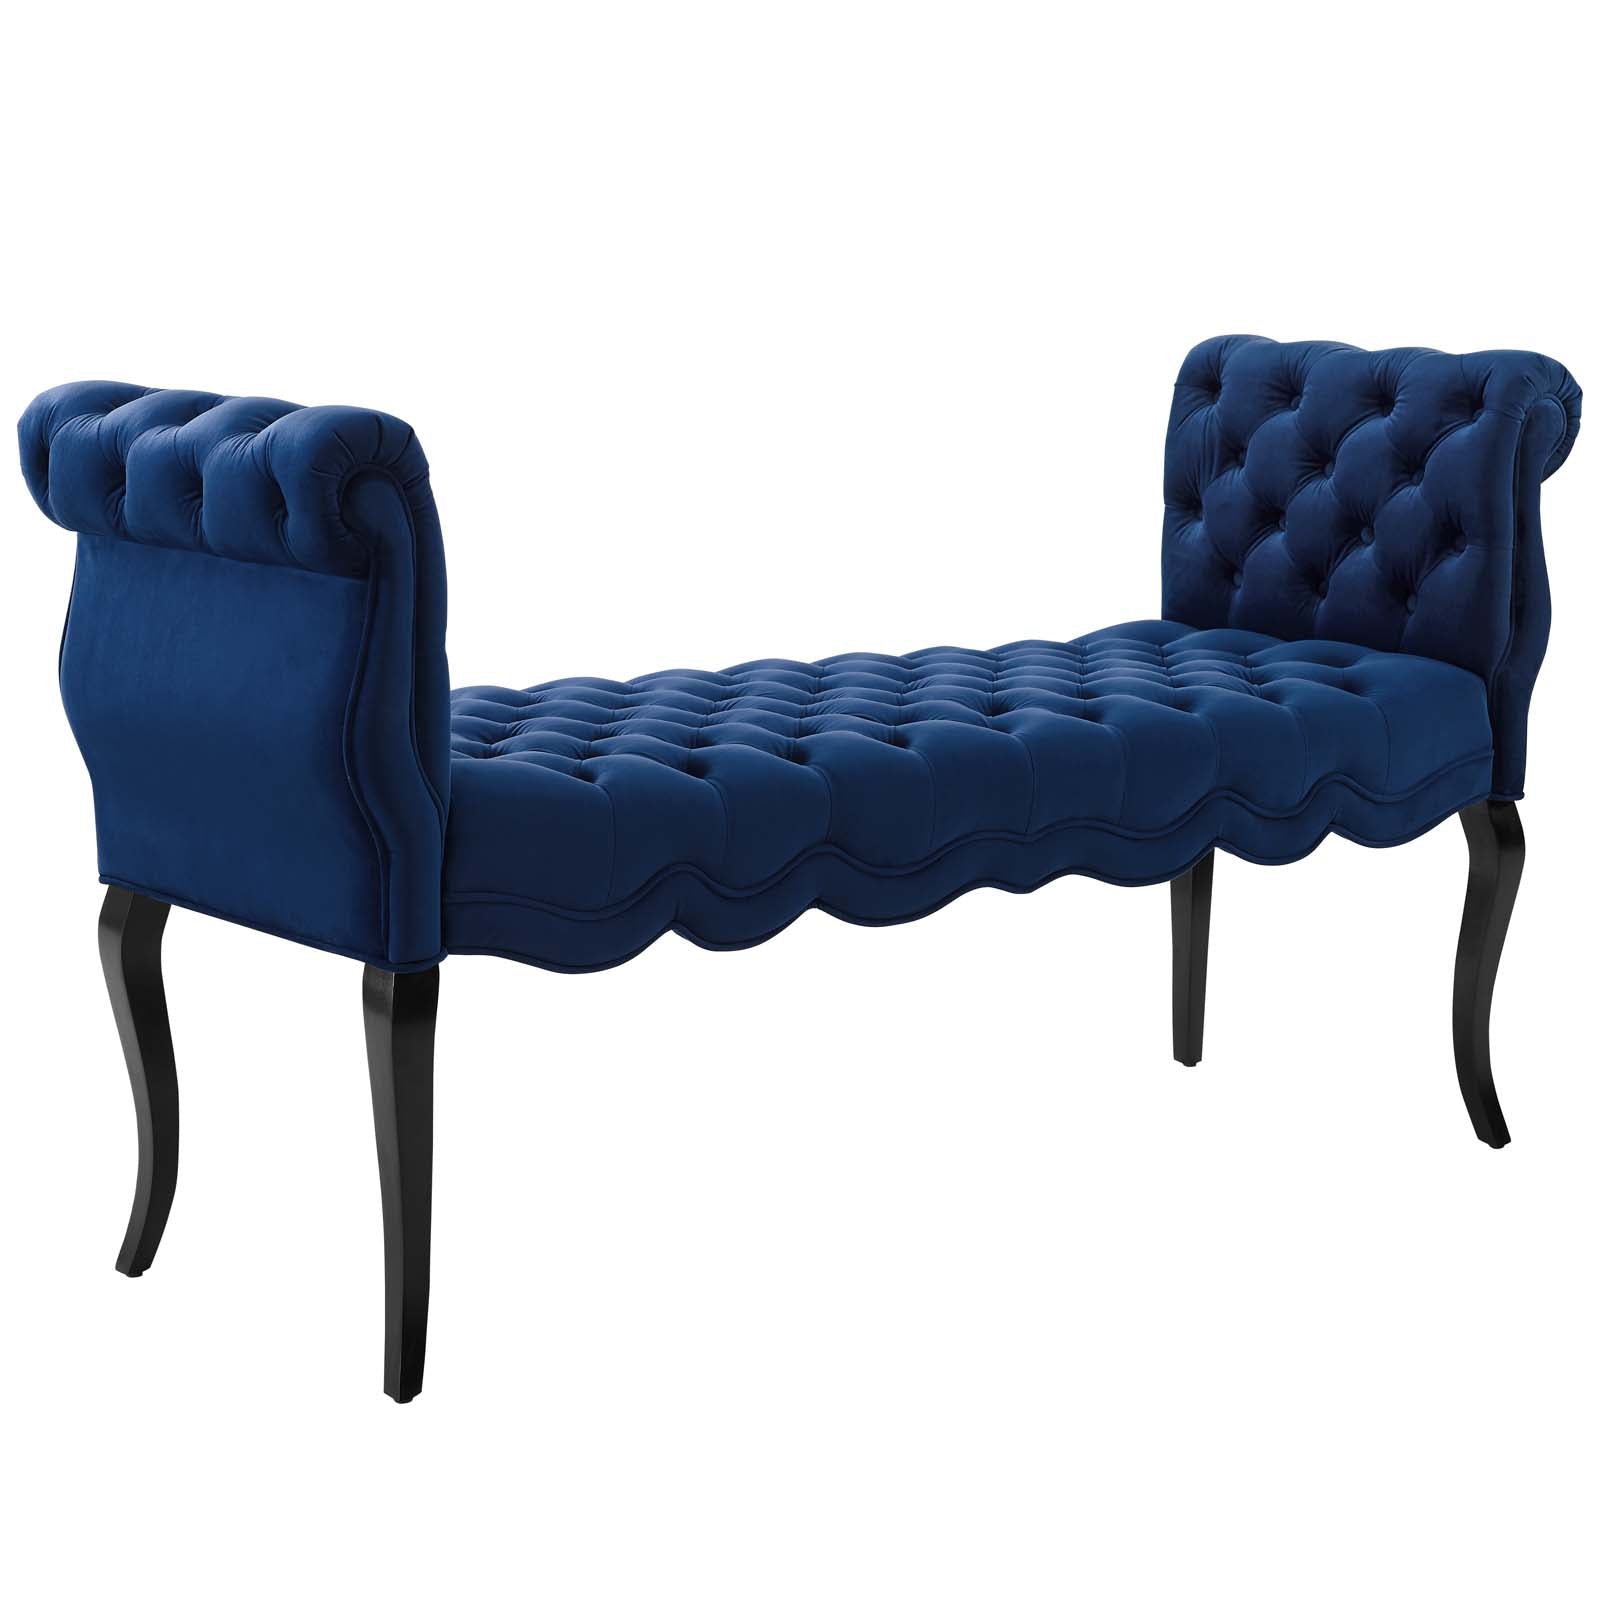 Modway Benches - Adelia Chesterfield Bench Navy